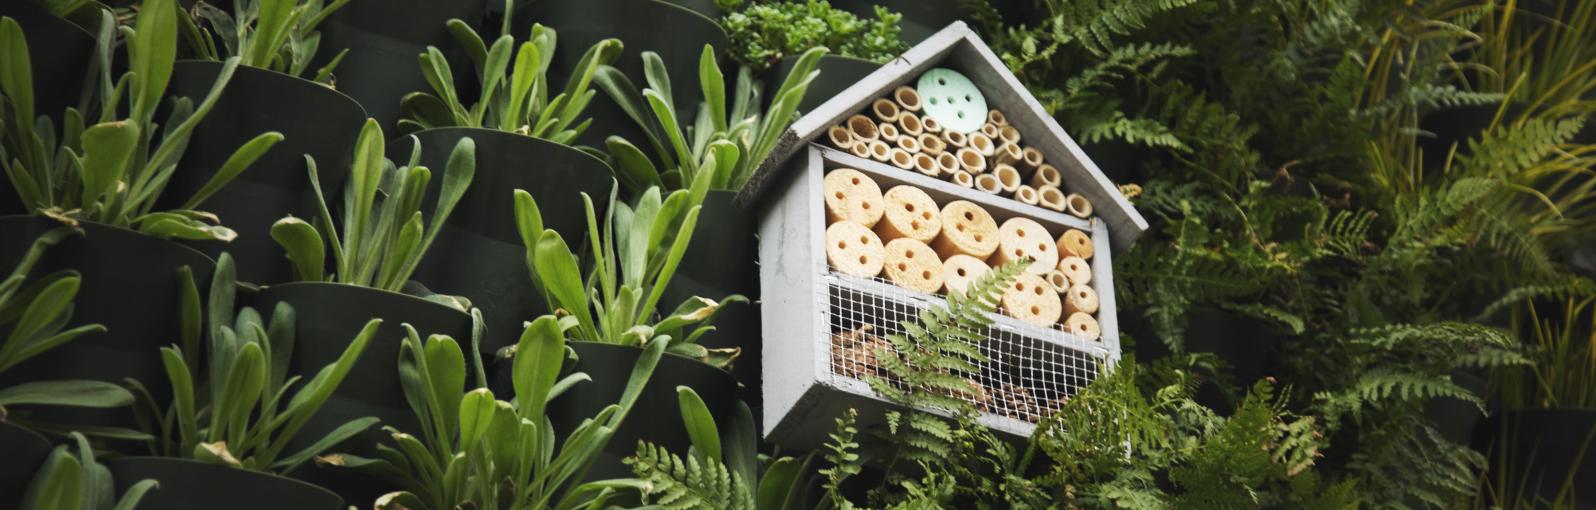 Green living wall with bug box made of wood